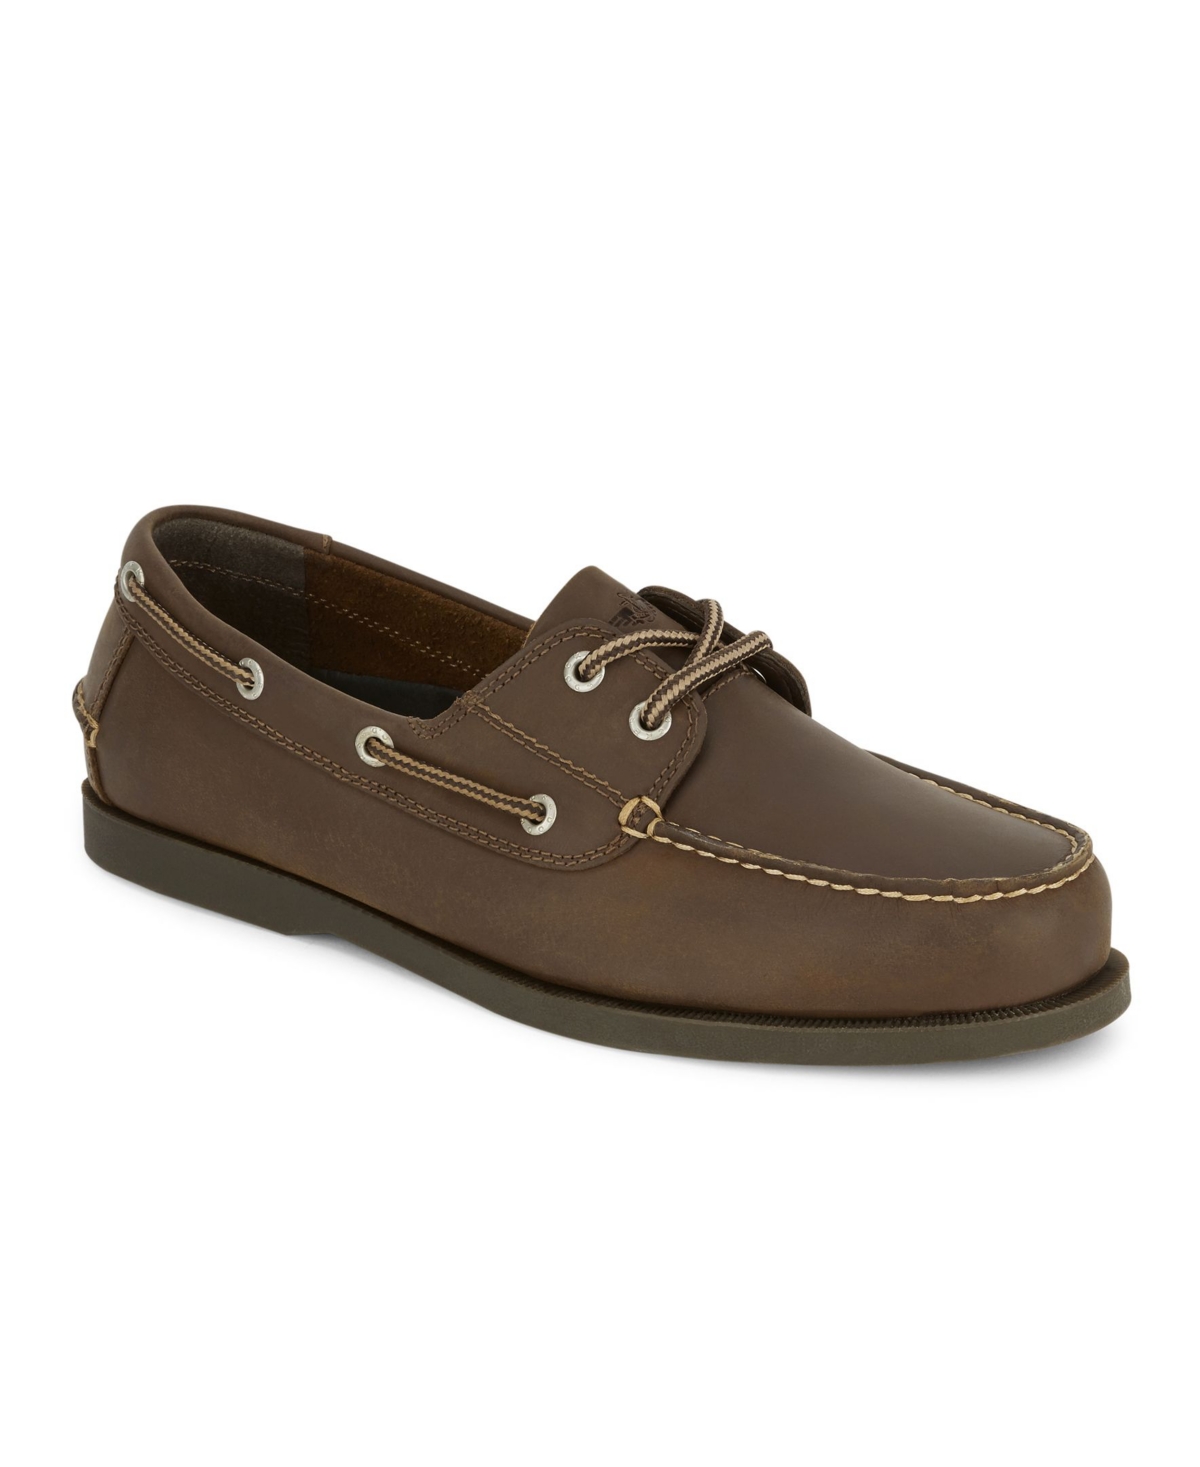 Men's Vargas Casual Boat Shoes - Charcoal, Navy